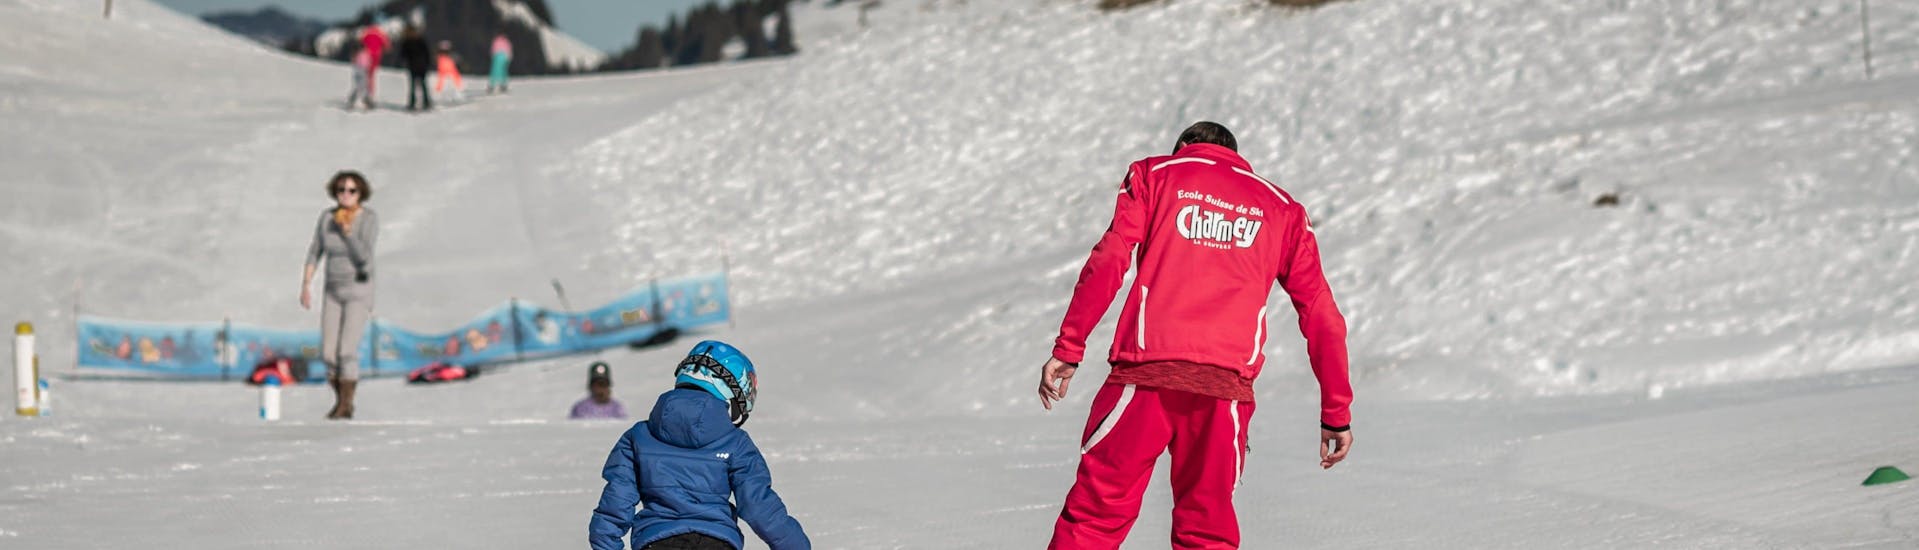 A kid is learning the basics of skiing with their ski instructor from the swiss ski school Charmey during their Private Ski Lessons for Kids (from 3 years) - All Levels.